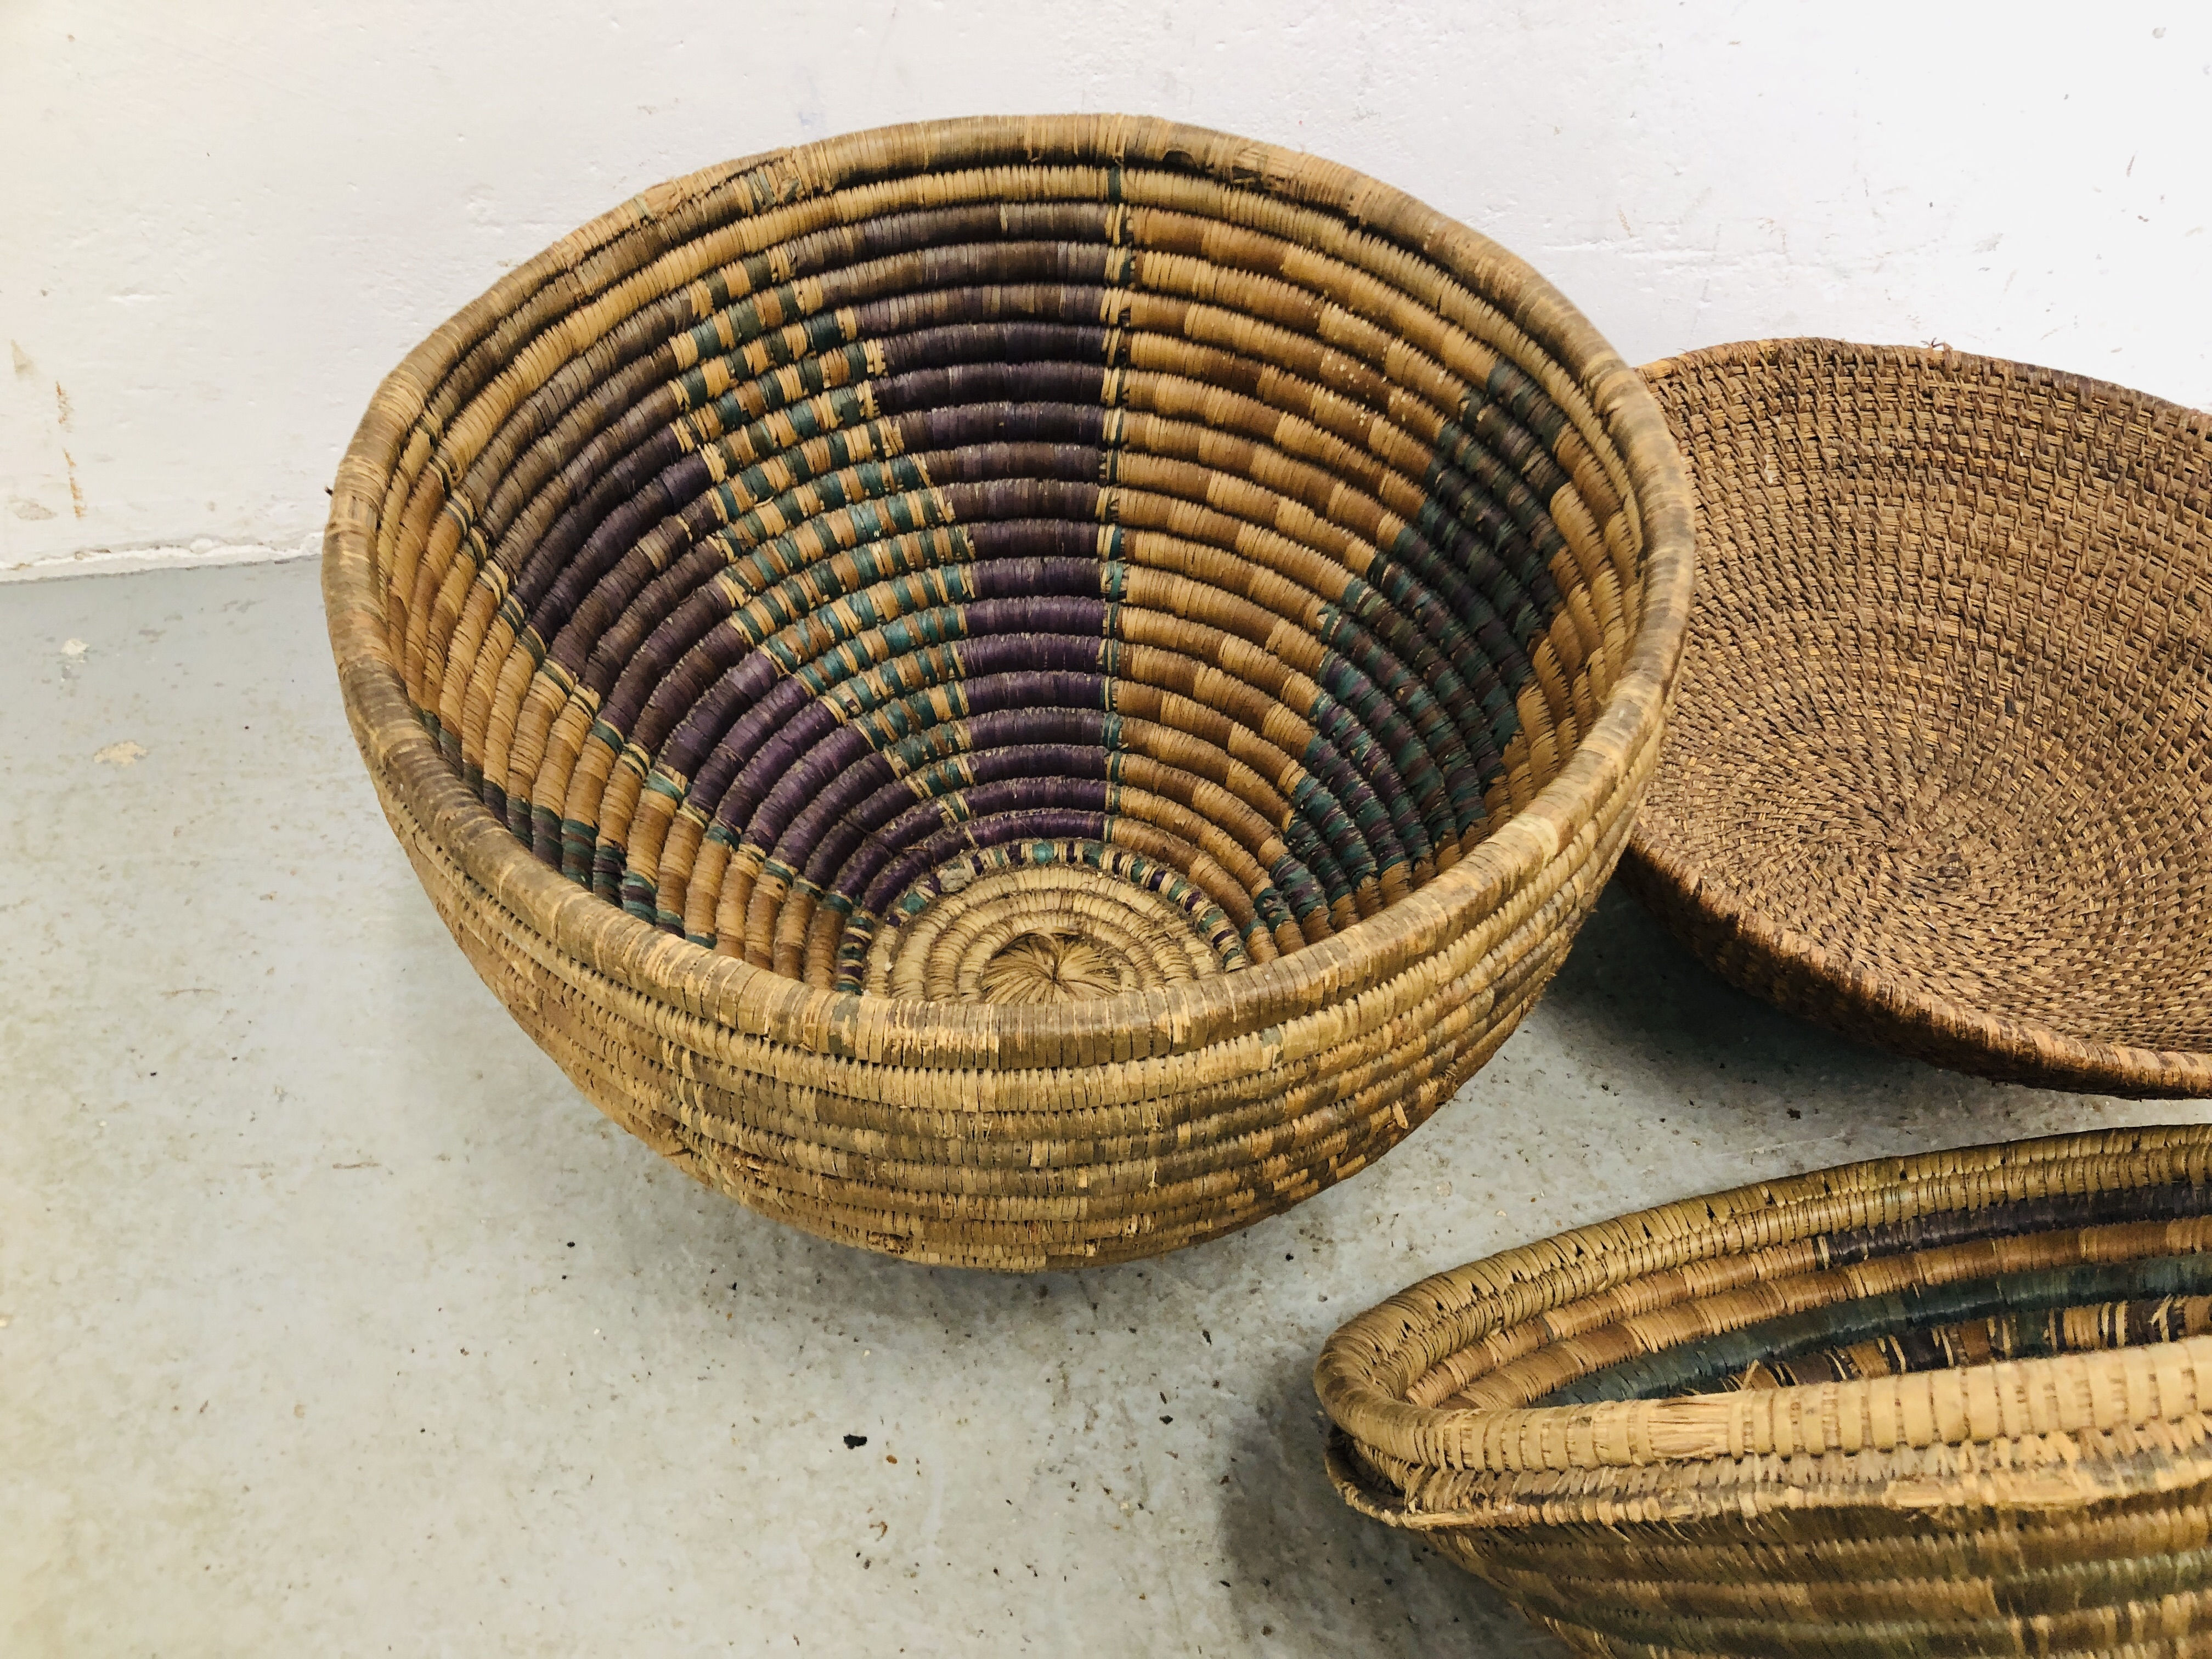 VINTAGE WICKER / SEAGRASS SNAKES BASKET AND ONE OTHER ALONG WITH 4 VINTAGE WALKING CANES, - Image 6 of 8